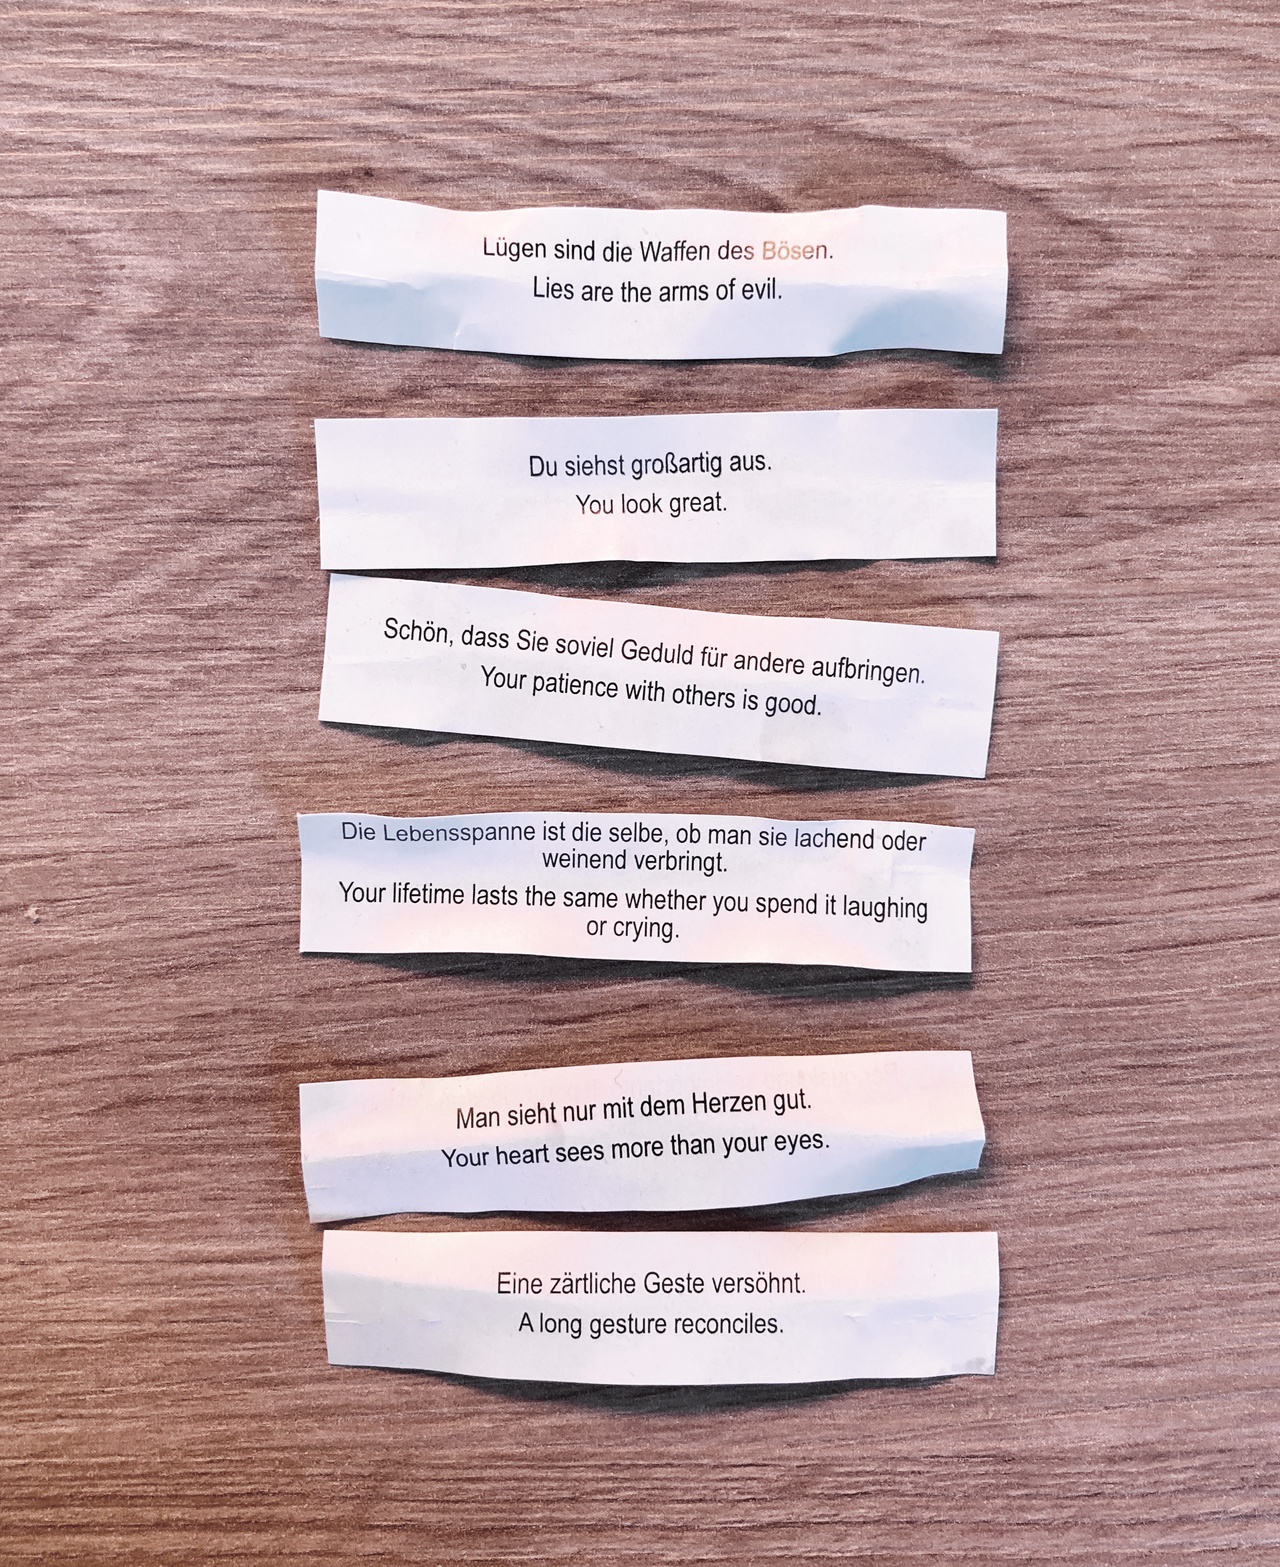 Fortune cookie poem composed during “documenta fifteen”